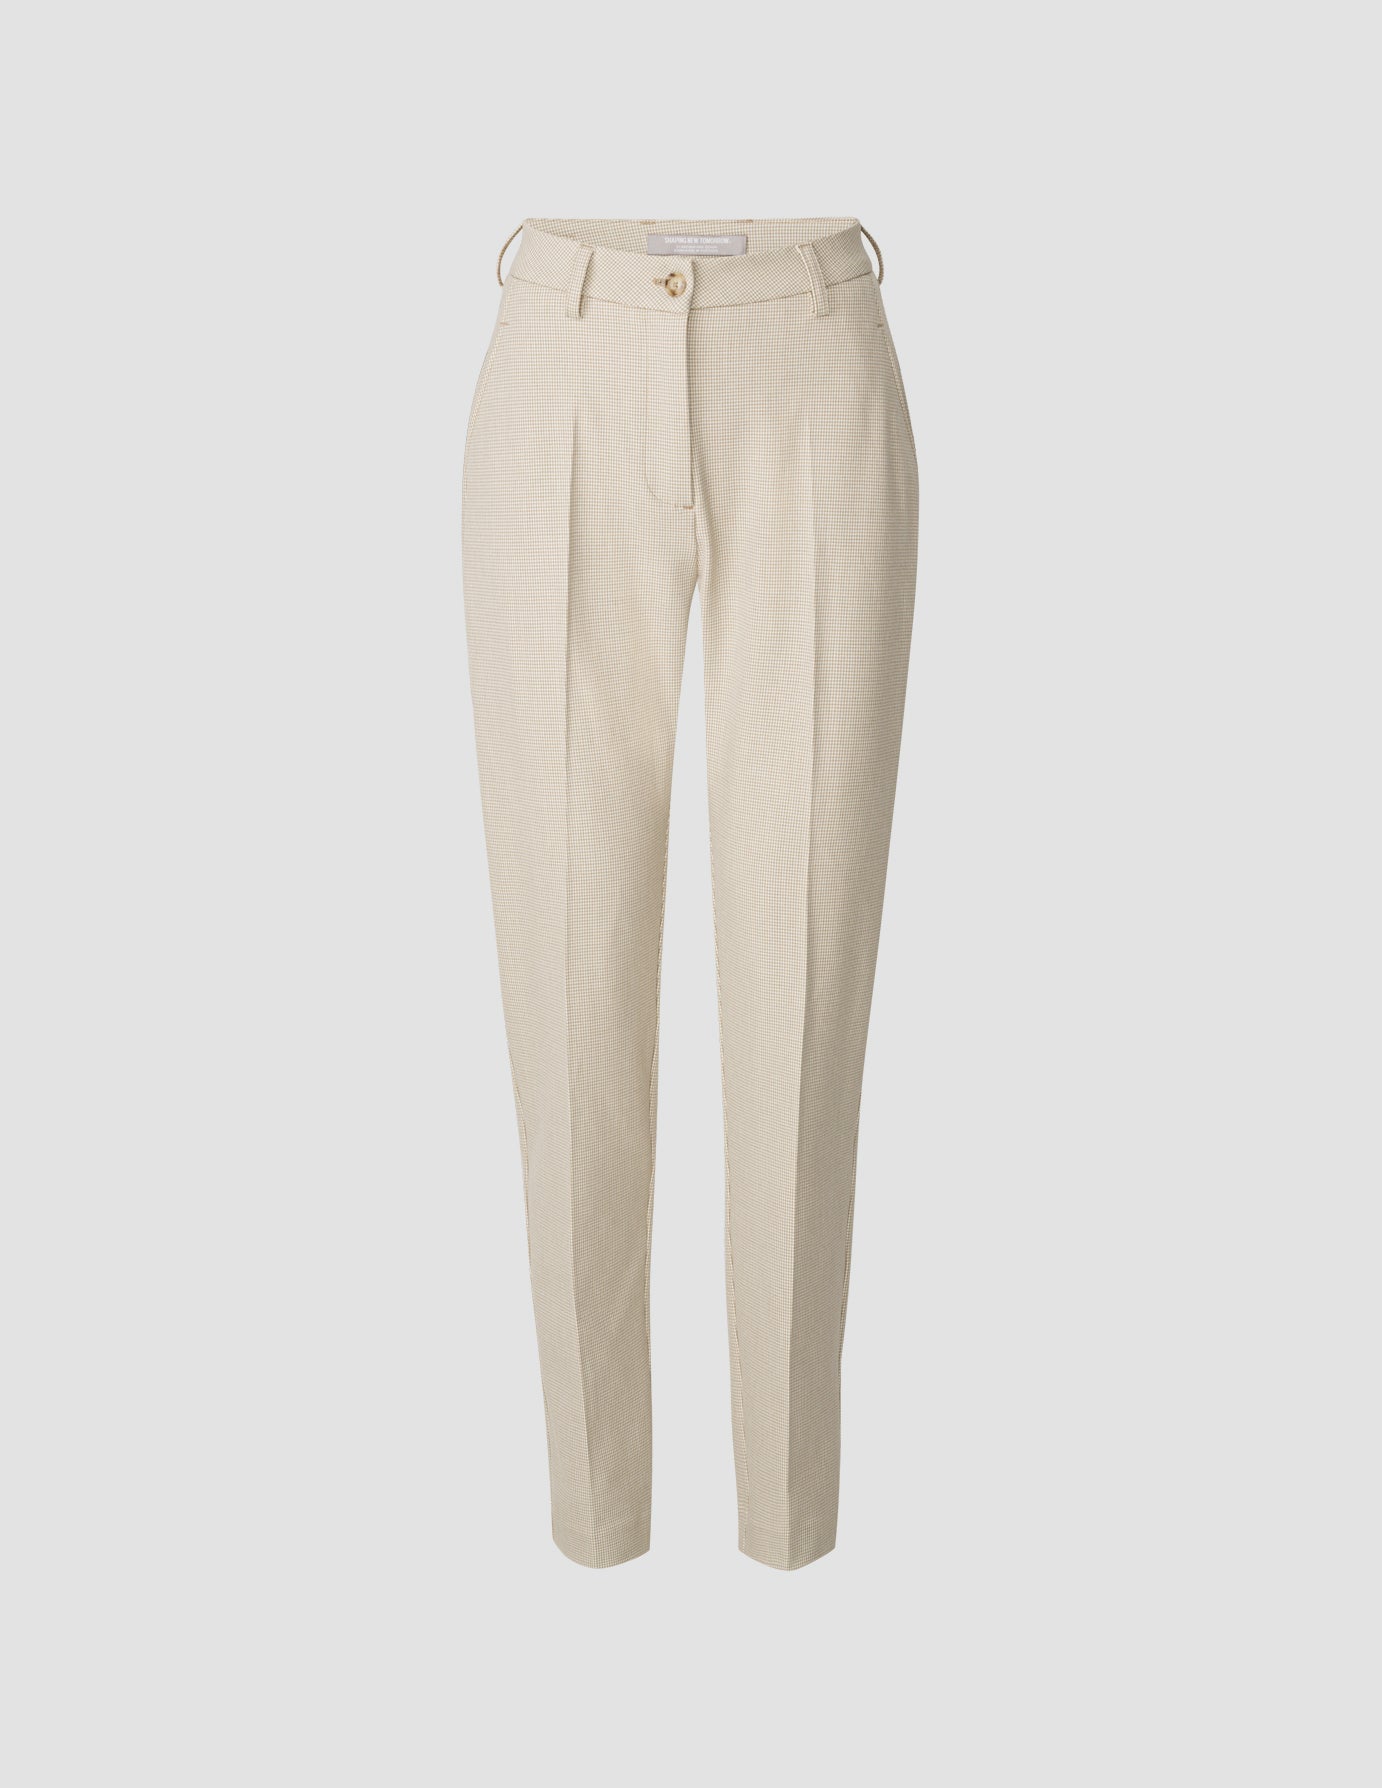 Trousers | Petite Tapered Belted Trousers | Roman